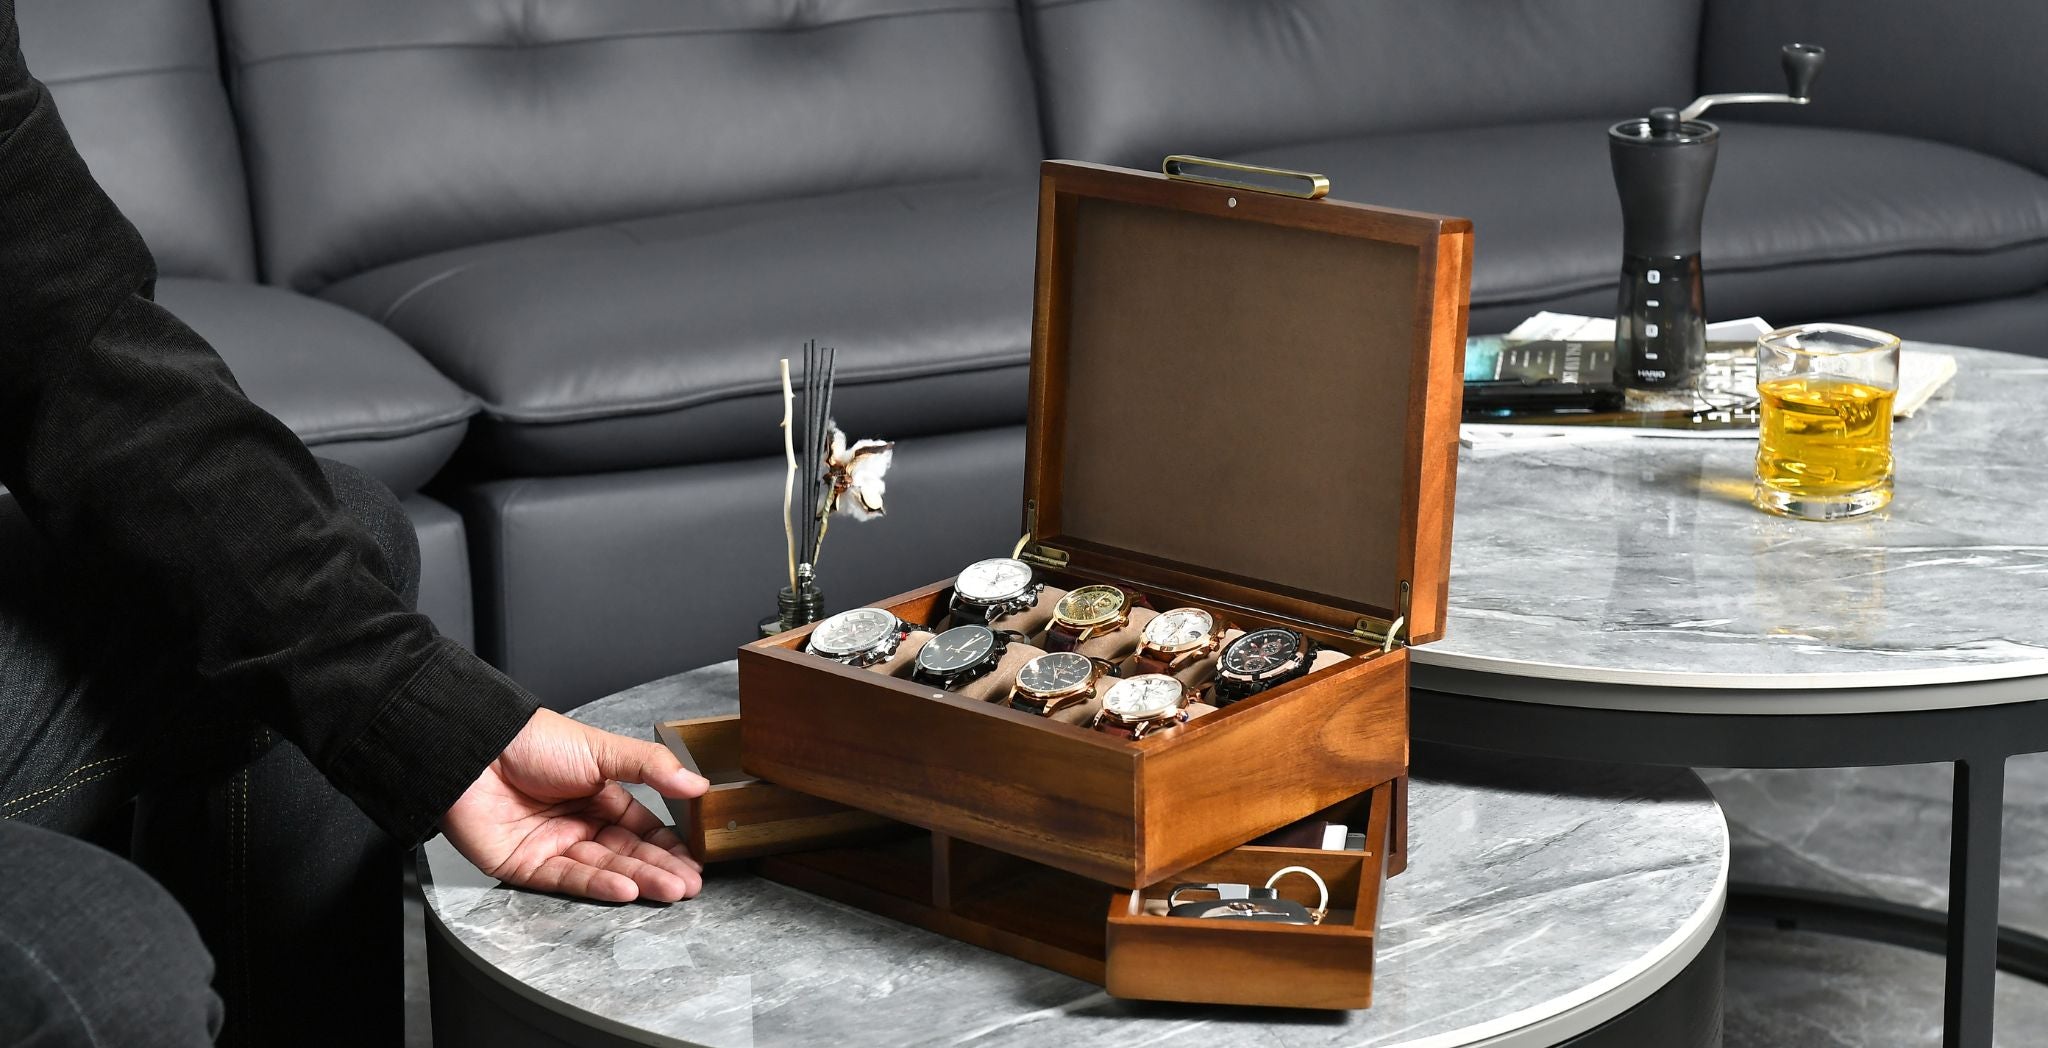 how to store watches long term, how to store watches in a watch box, best way to store your watches, best way to store your watches long term, best way to store your watches in watch box